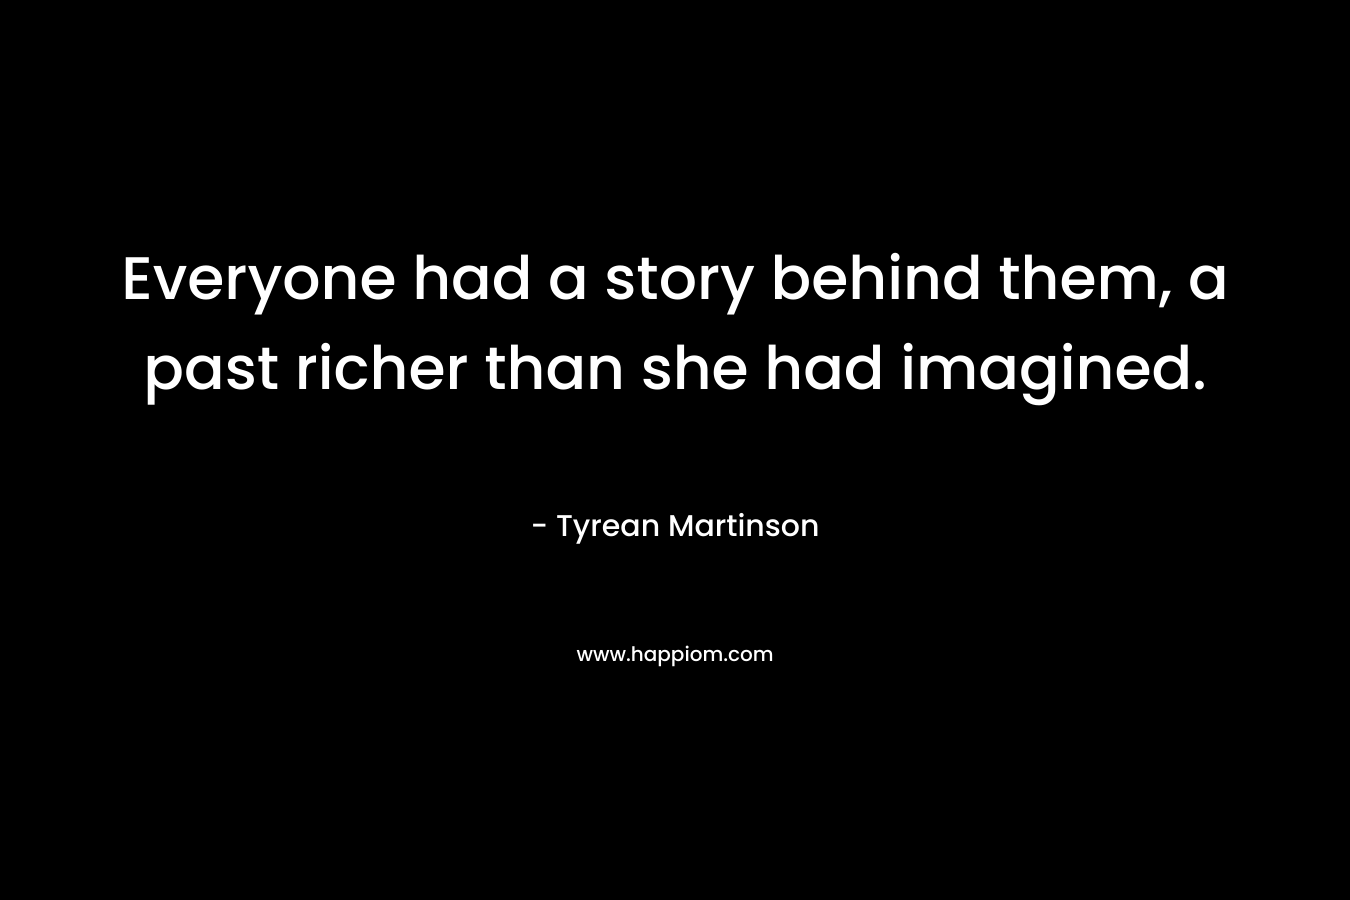 Everyone had a story behind them, a past richer than she had imagined.